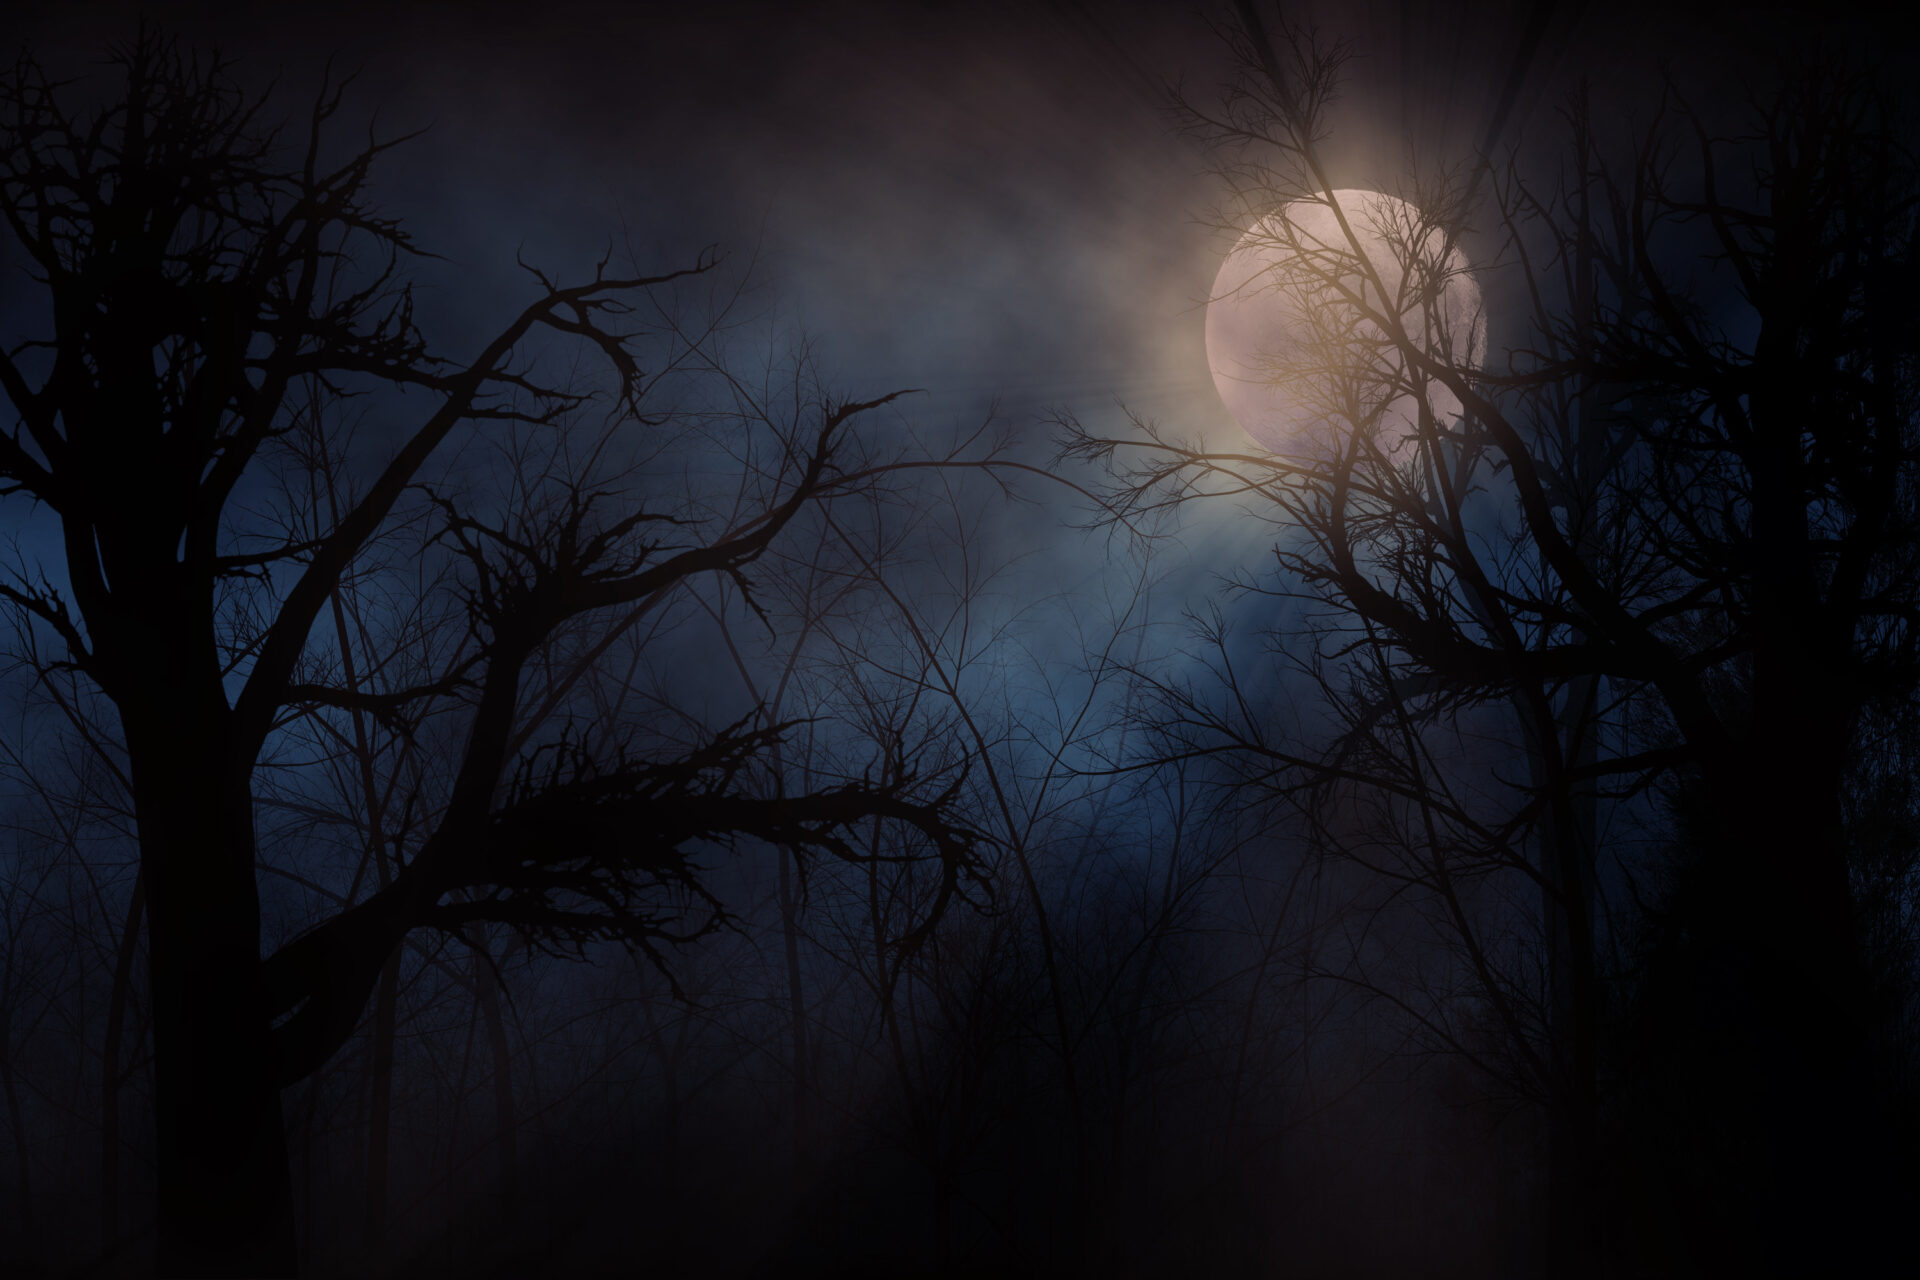 Spooky moon behind mist and bare tree branches.